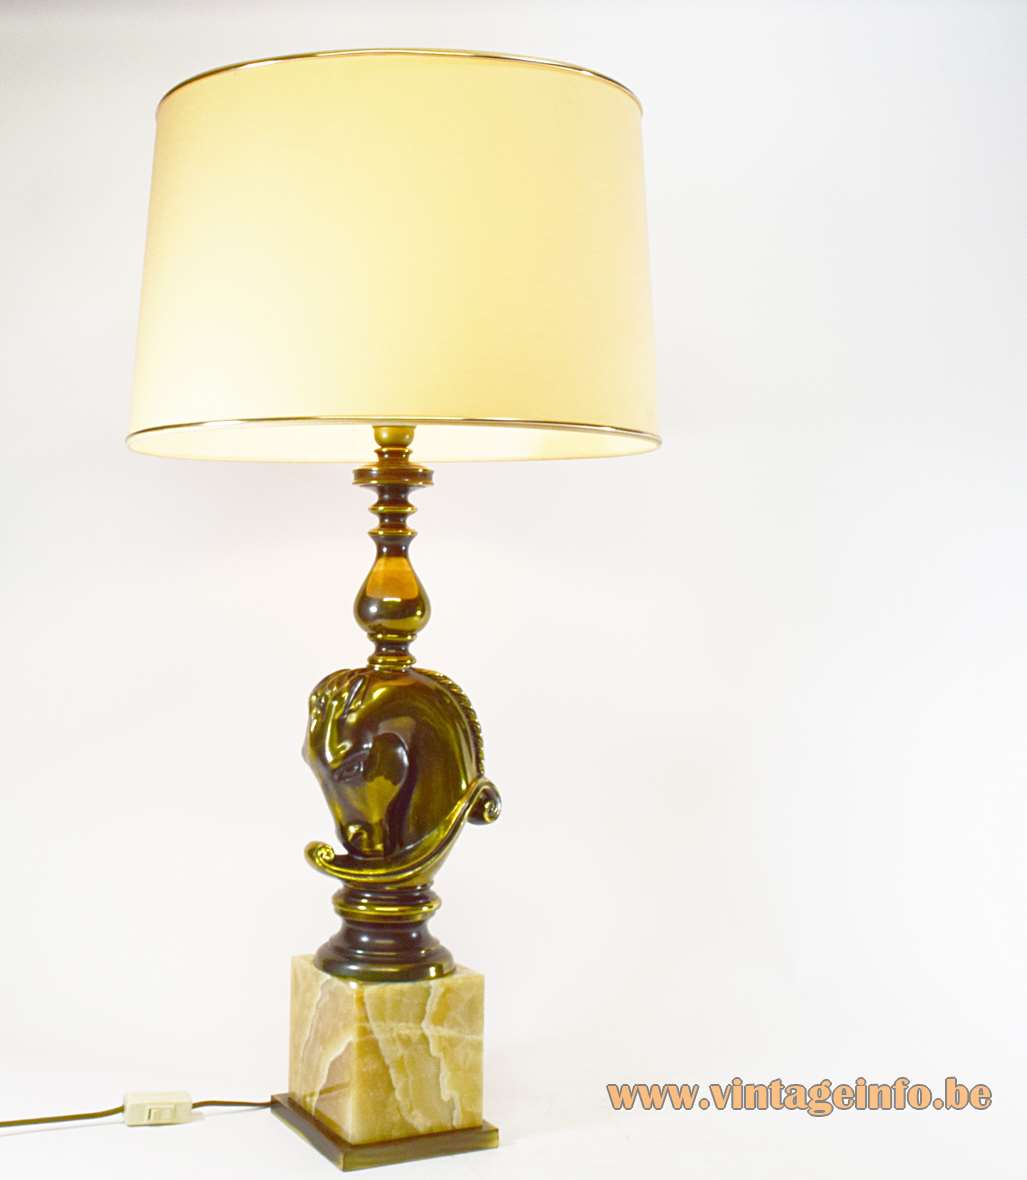 Horsehead table lamp brown onyx marble base brass head fabric lampshade Loevsky and Loevsky E27 socket